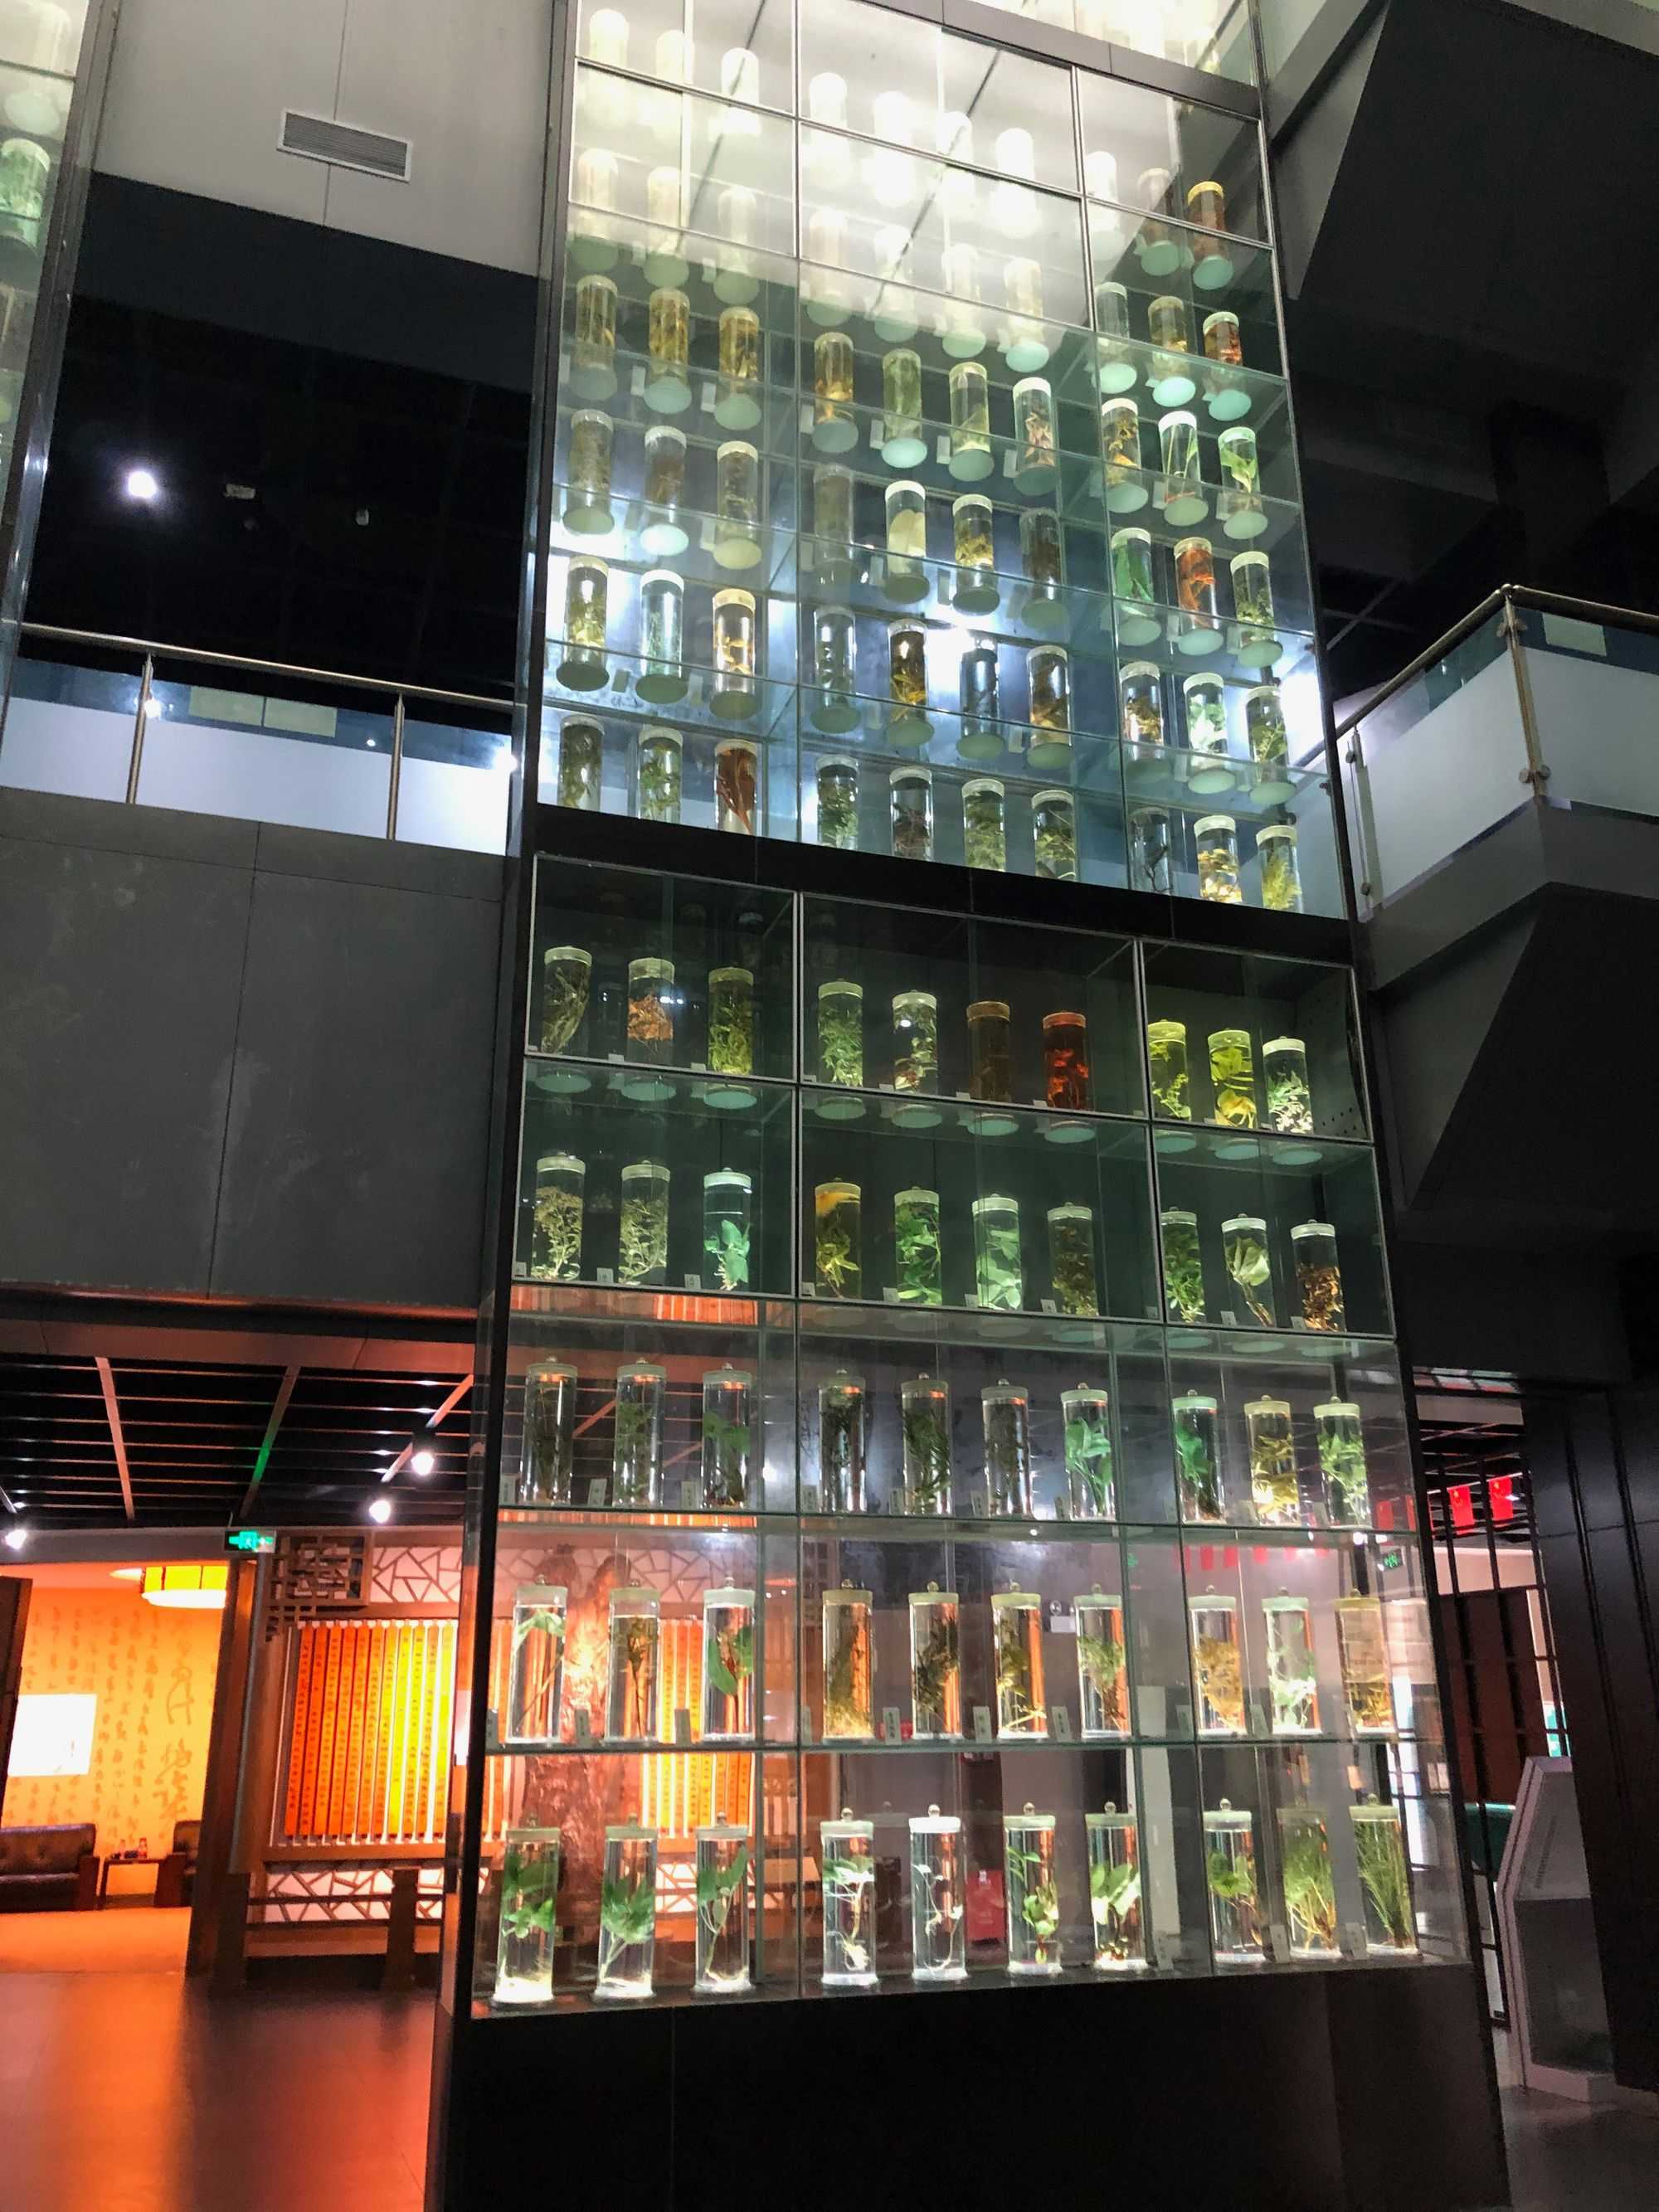 Guangdong Chinese Medicine Museum (广州中医药博物館) (Image by author)